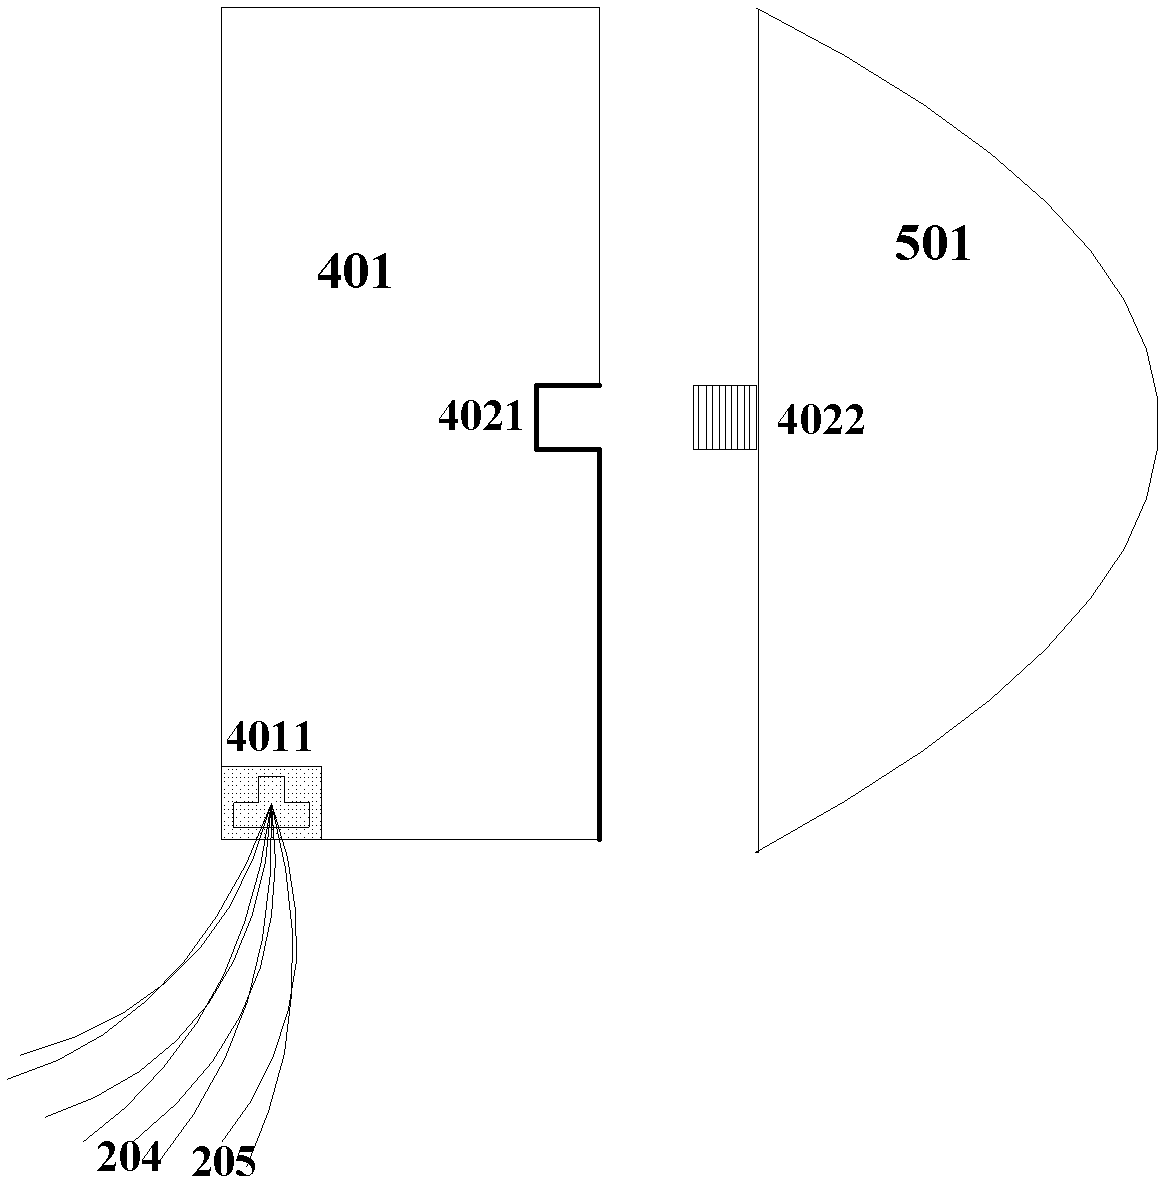 Indoor coverage radio-frequency communication system